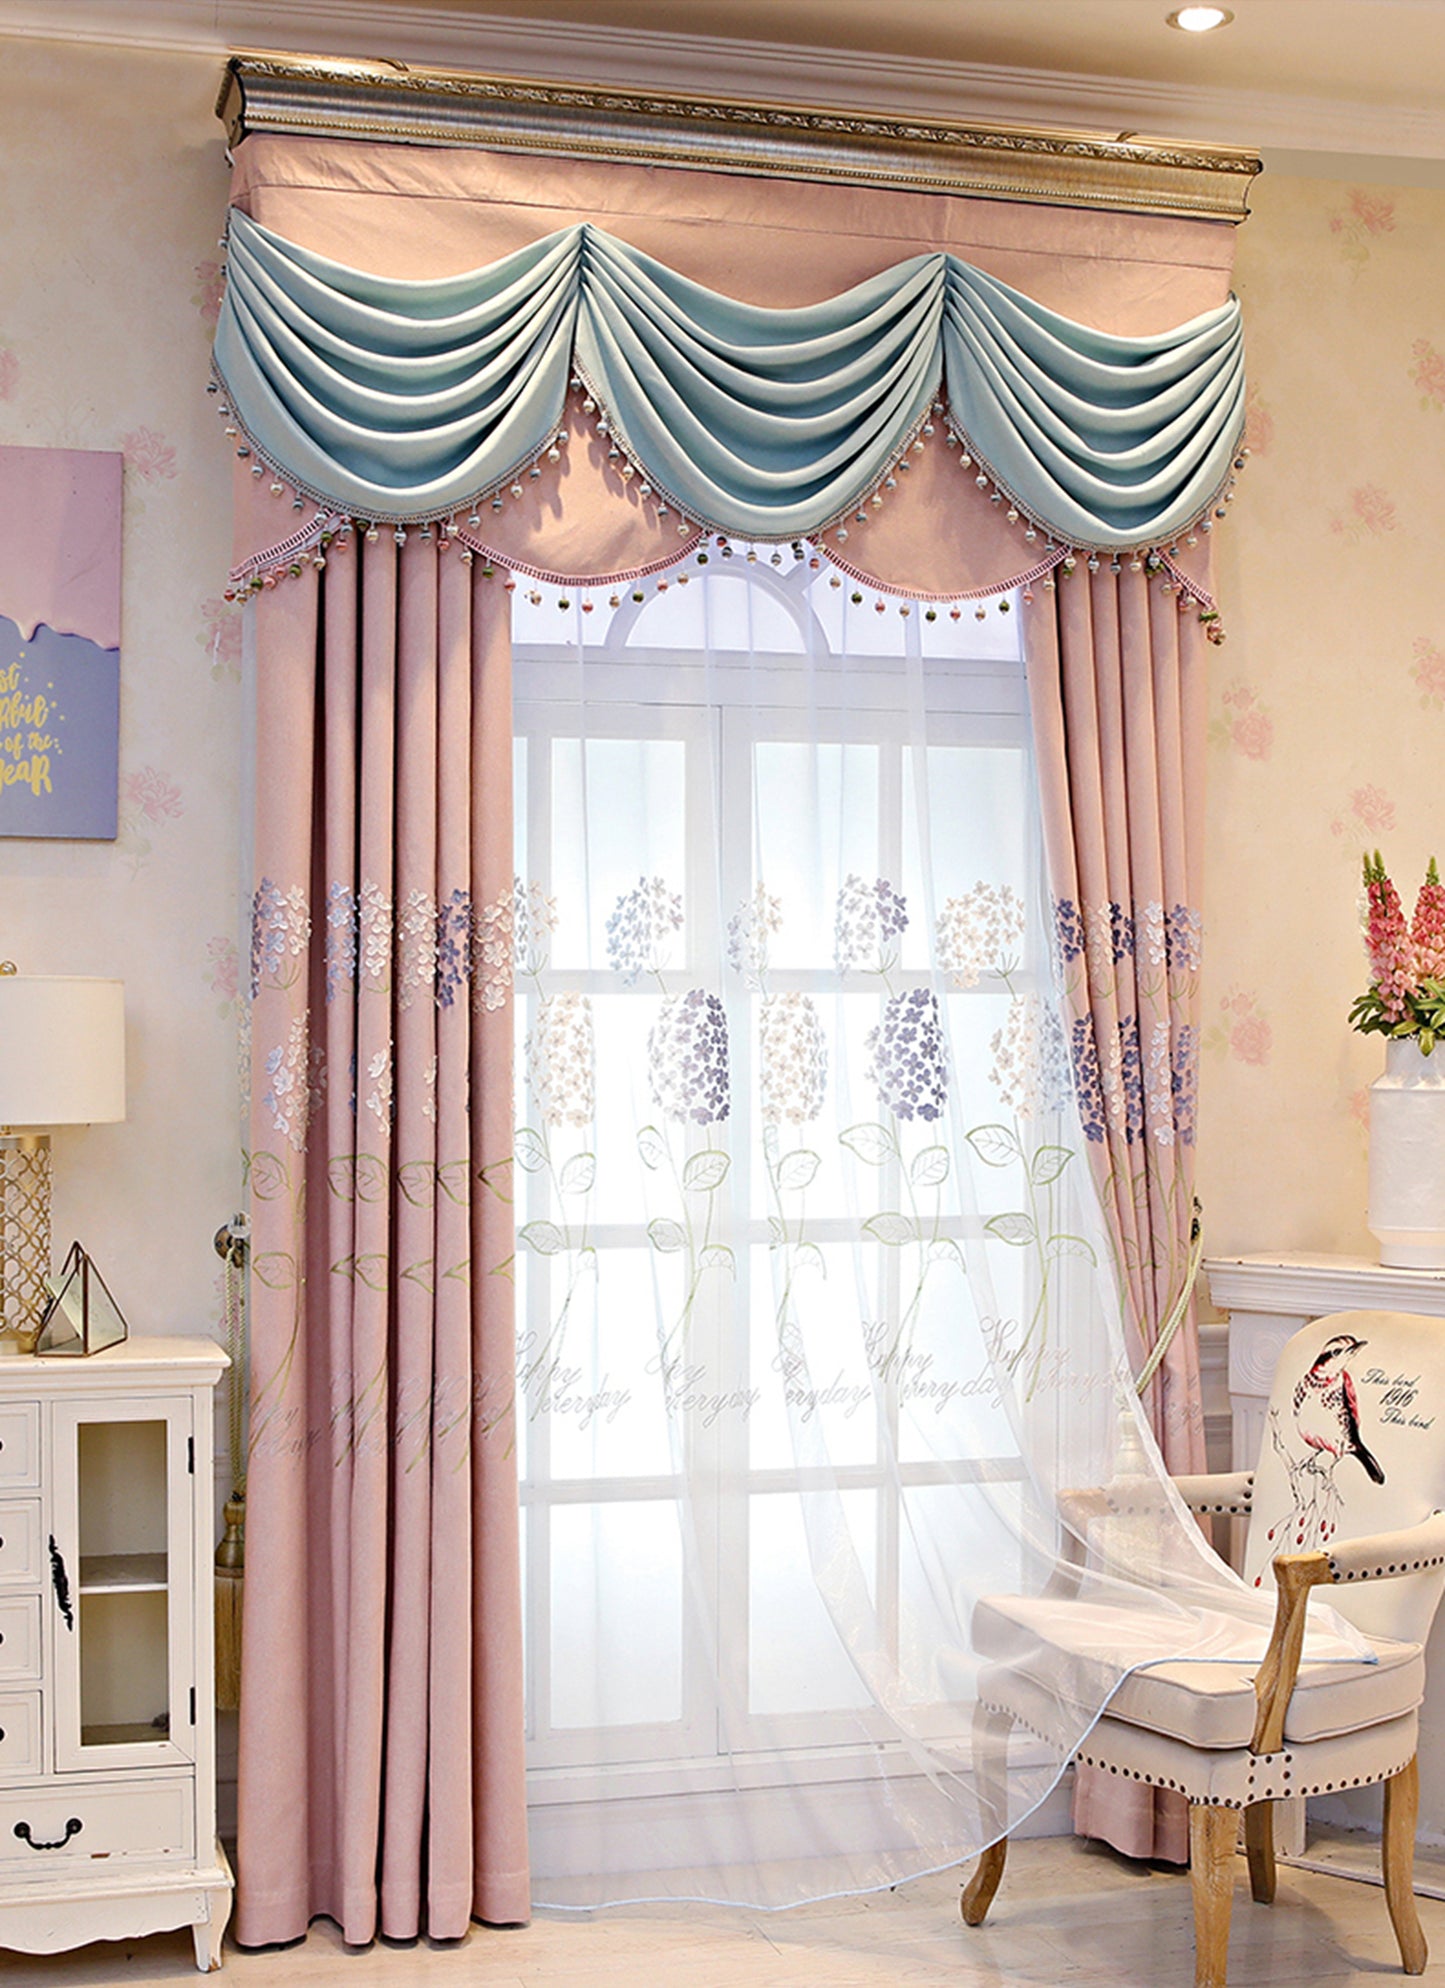 Pink embroidered floral pattern Curtains for Living Room Bedroom Decoration High-end Floral Curtains Ctom 2 Panels Drapes